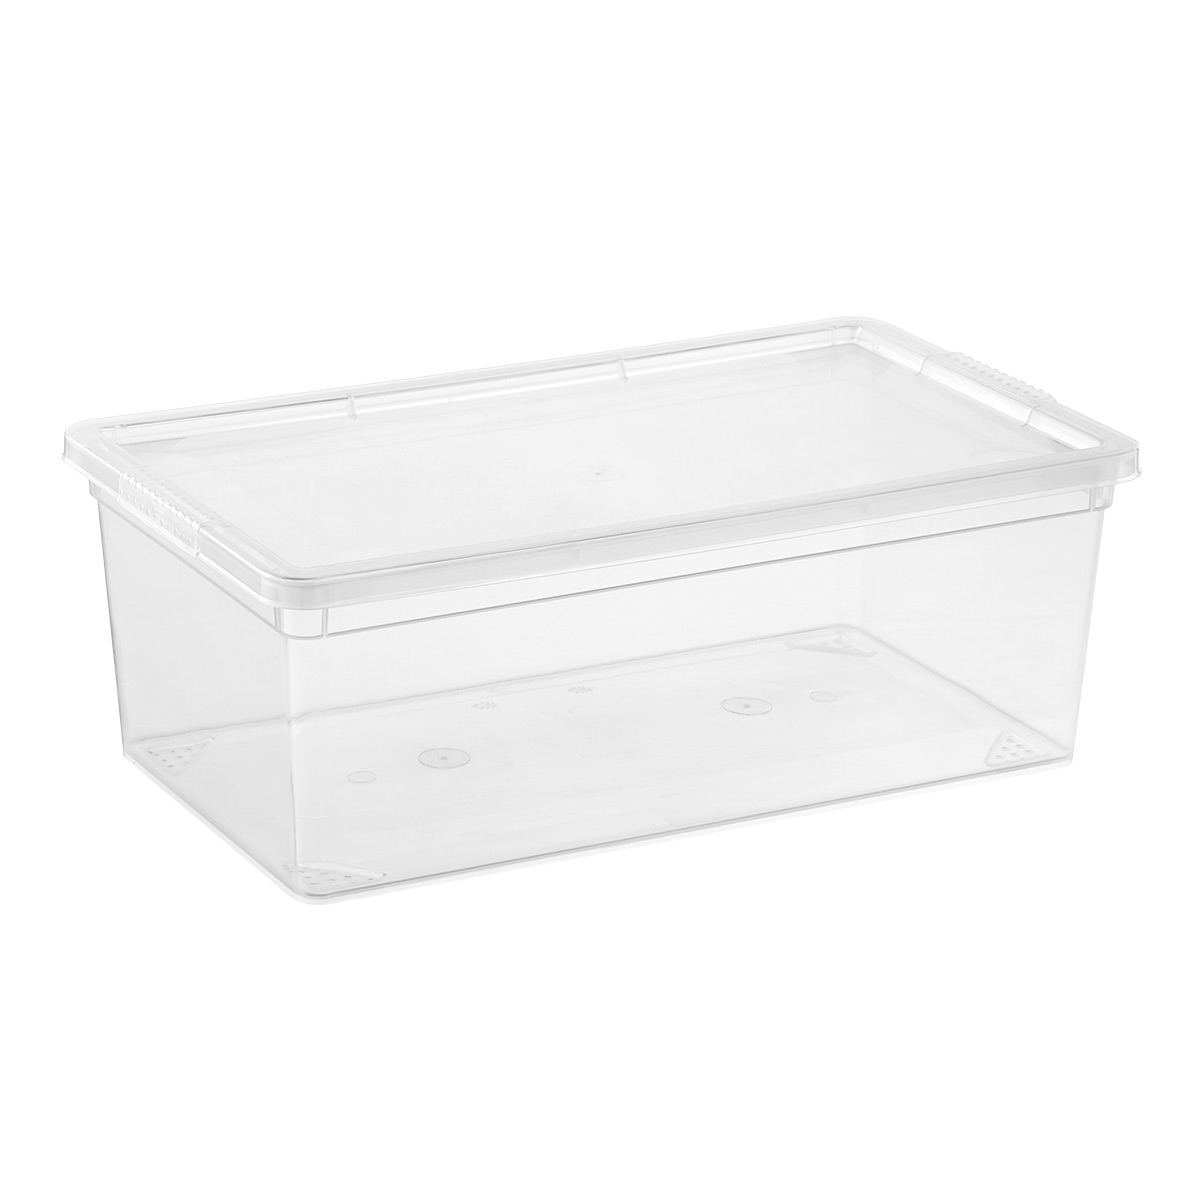 https://www.containerstore.com/catalogimages/434117/10085533_small_our_tidy_box_clear.jpg